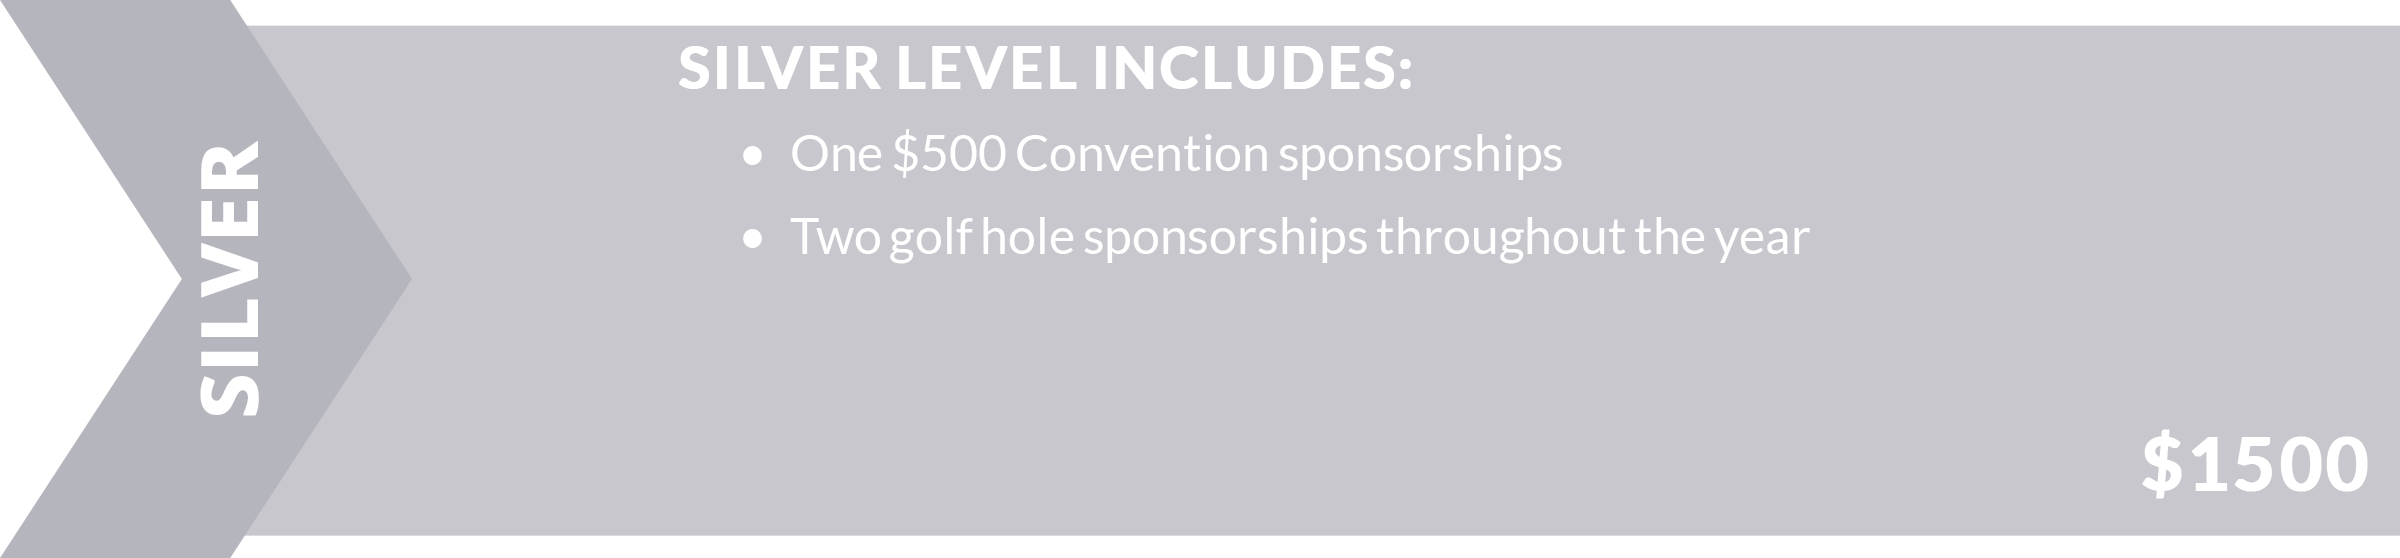 Silver Level Sponsorship Includes: One $500 Convention sponsorships. Two golf hole sponsorships throughout the year. $1500